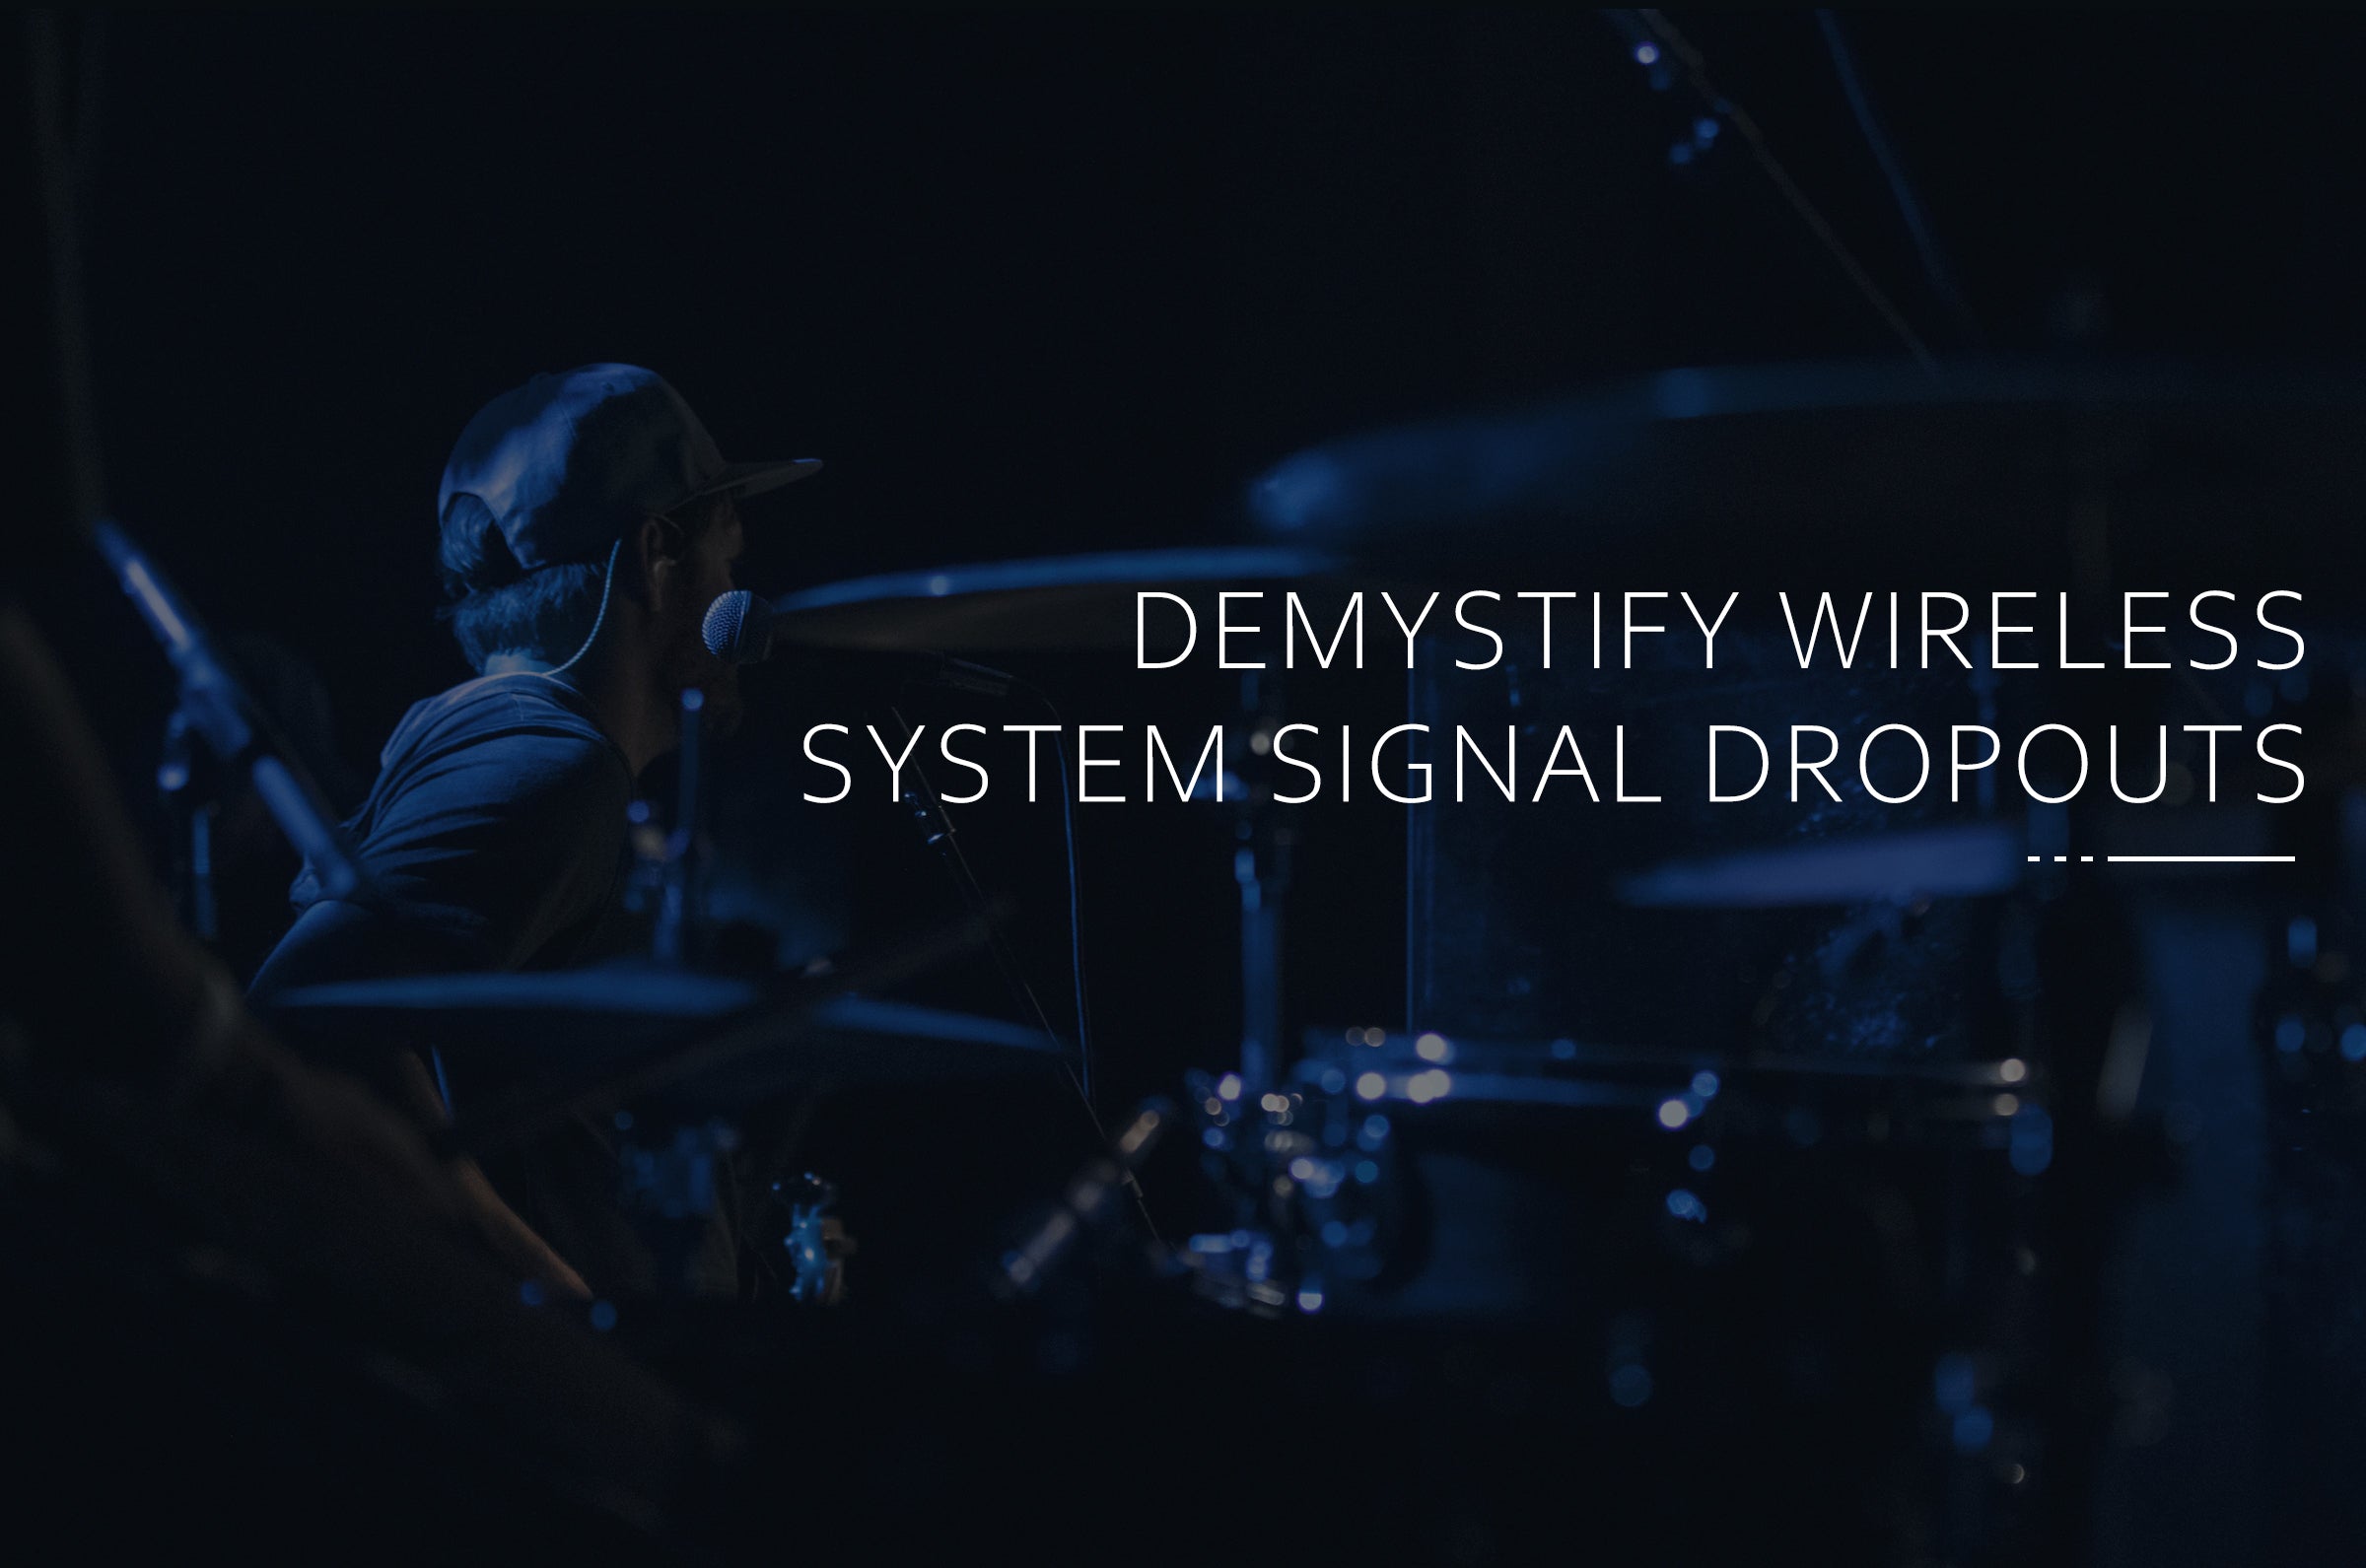 Demystify Wireless System Signal Dropouts